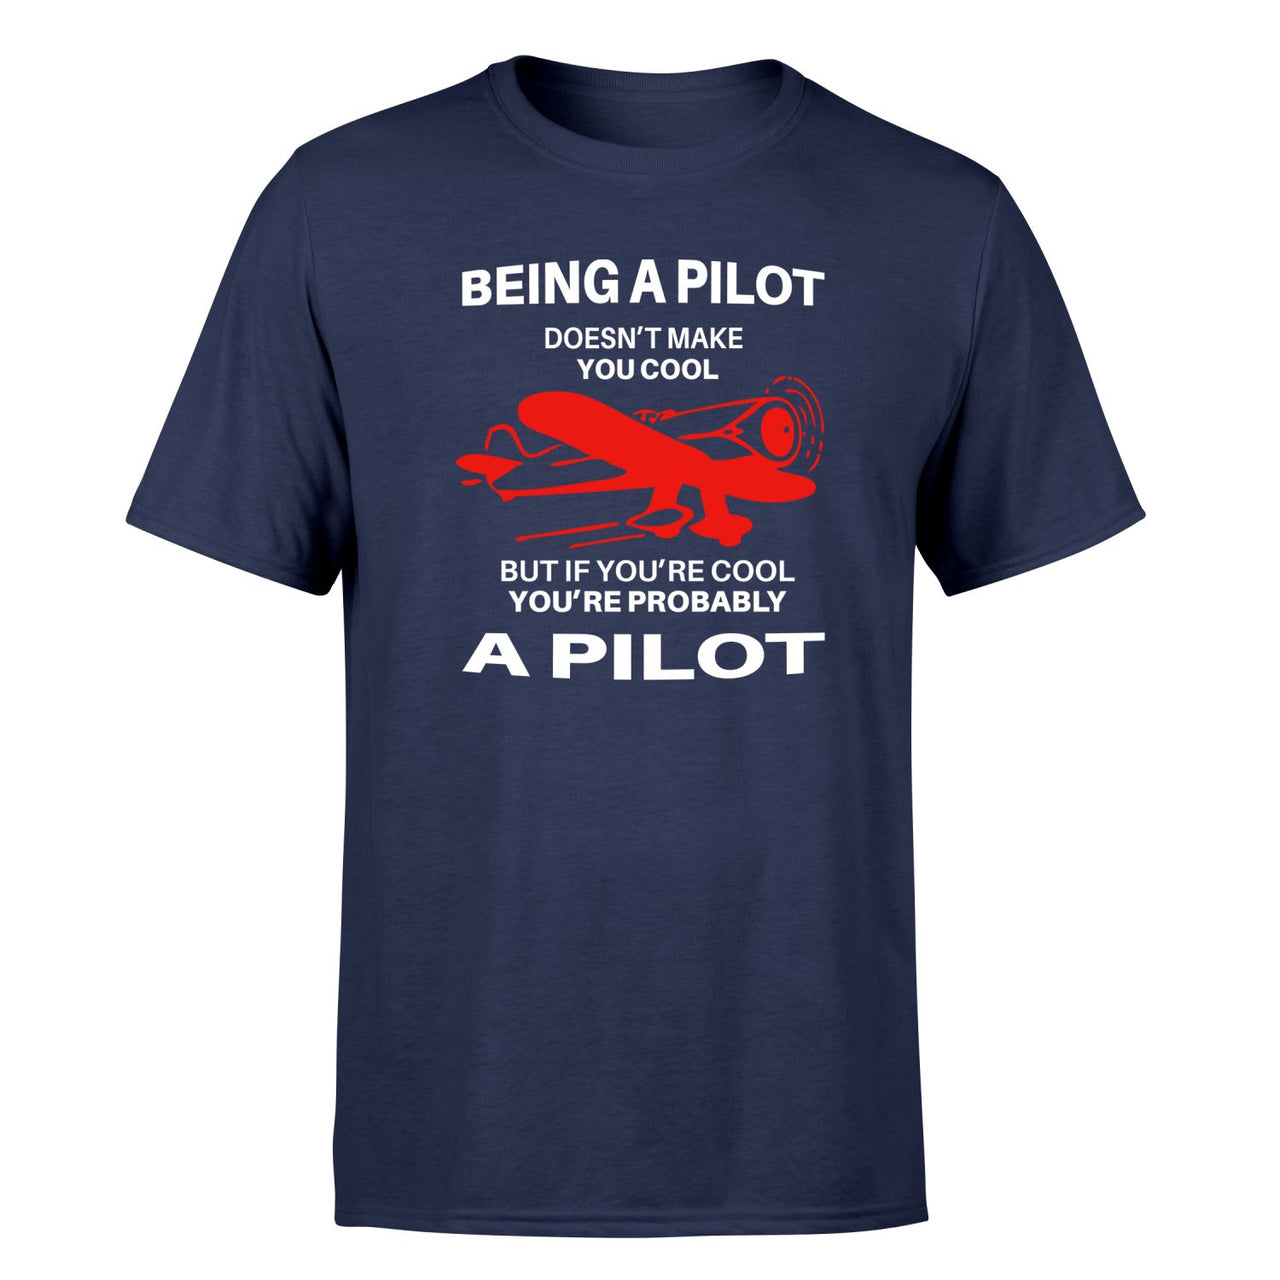 If You're Cool You're Probably a Pilot Designed T-Shirts